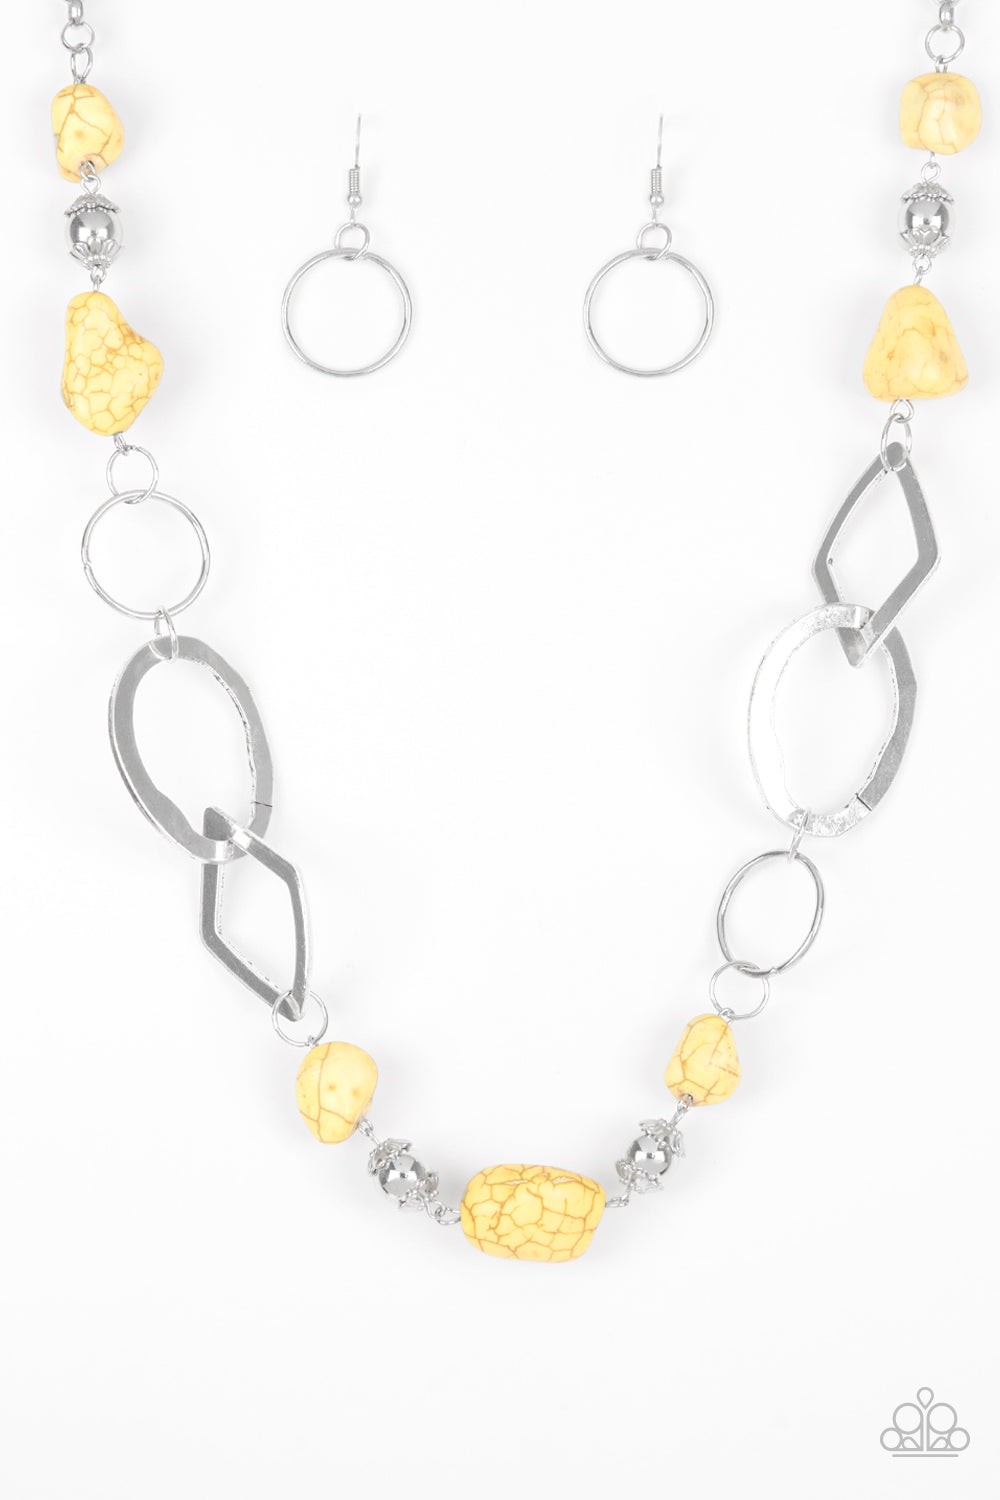 Thats TERRA-ific! Yellow Paparazzi Necklace Cashmere Pink Jewels - Cashmere Pink Jewels & Accessories, Cashmere Pink Jewels & Accessories - Paparazzi